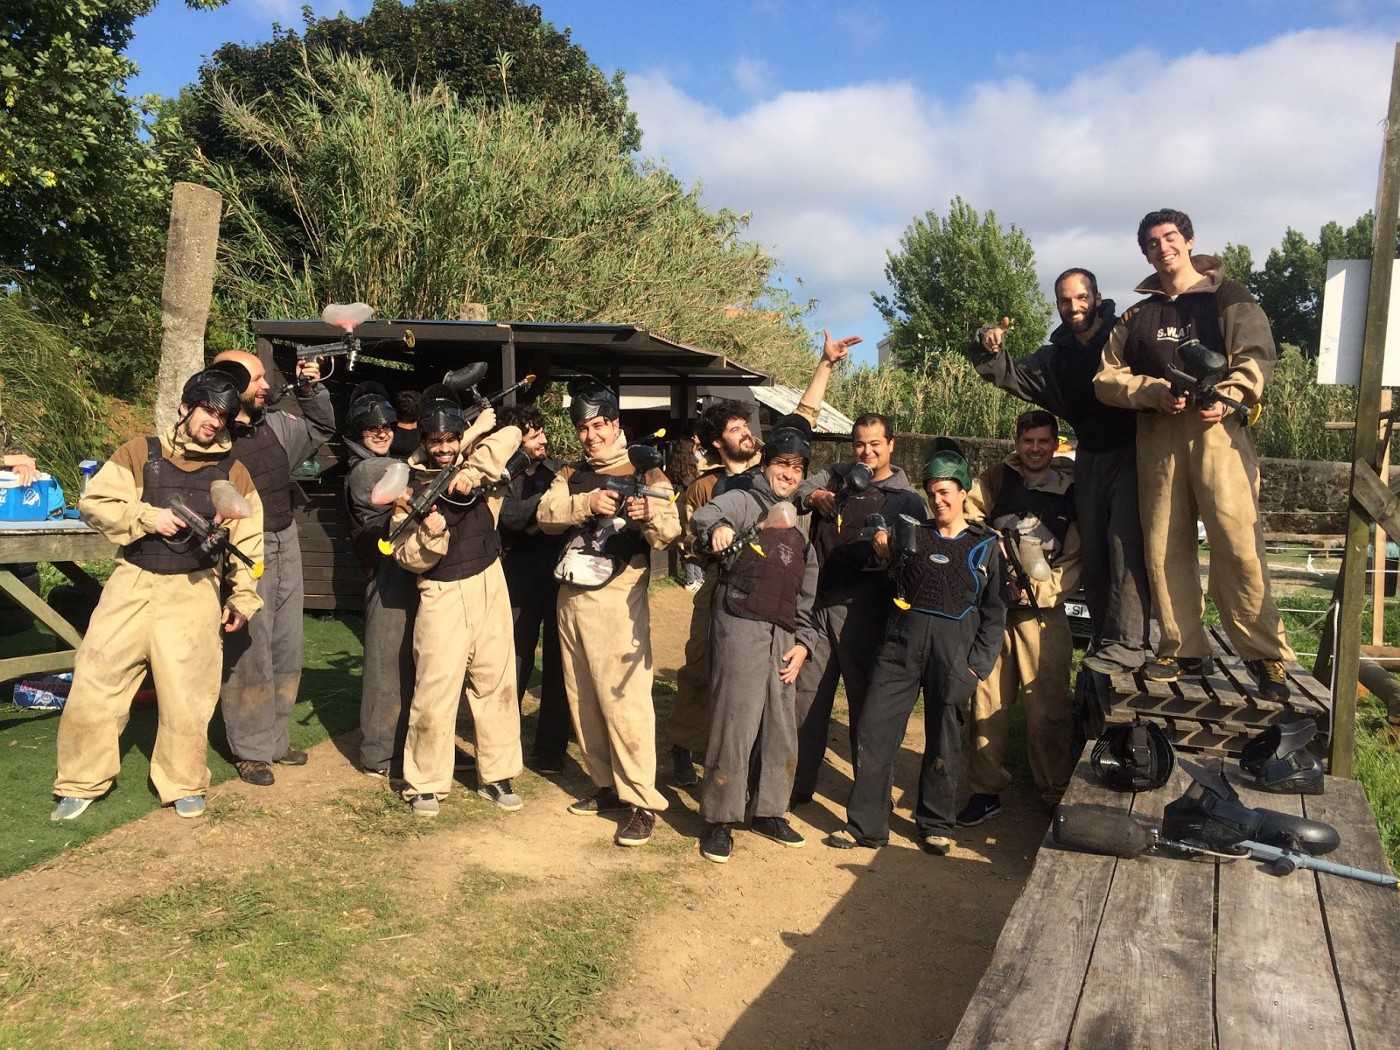 The Glazed team all geared up for a paintball match